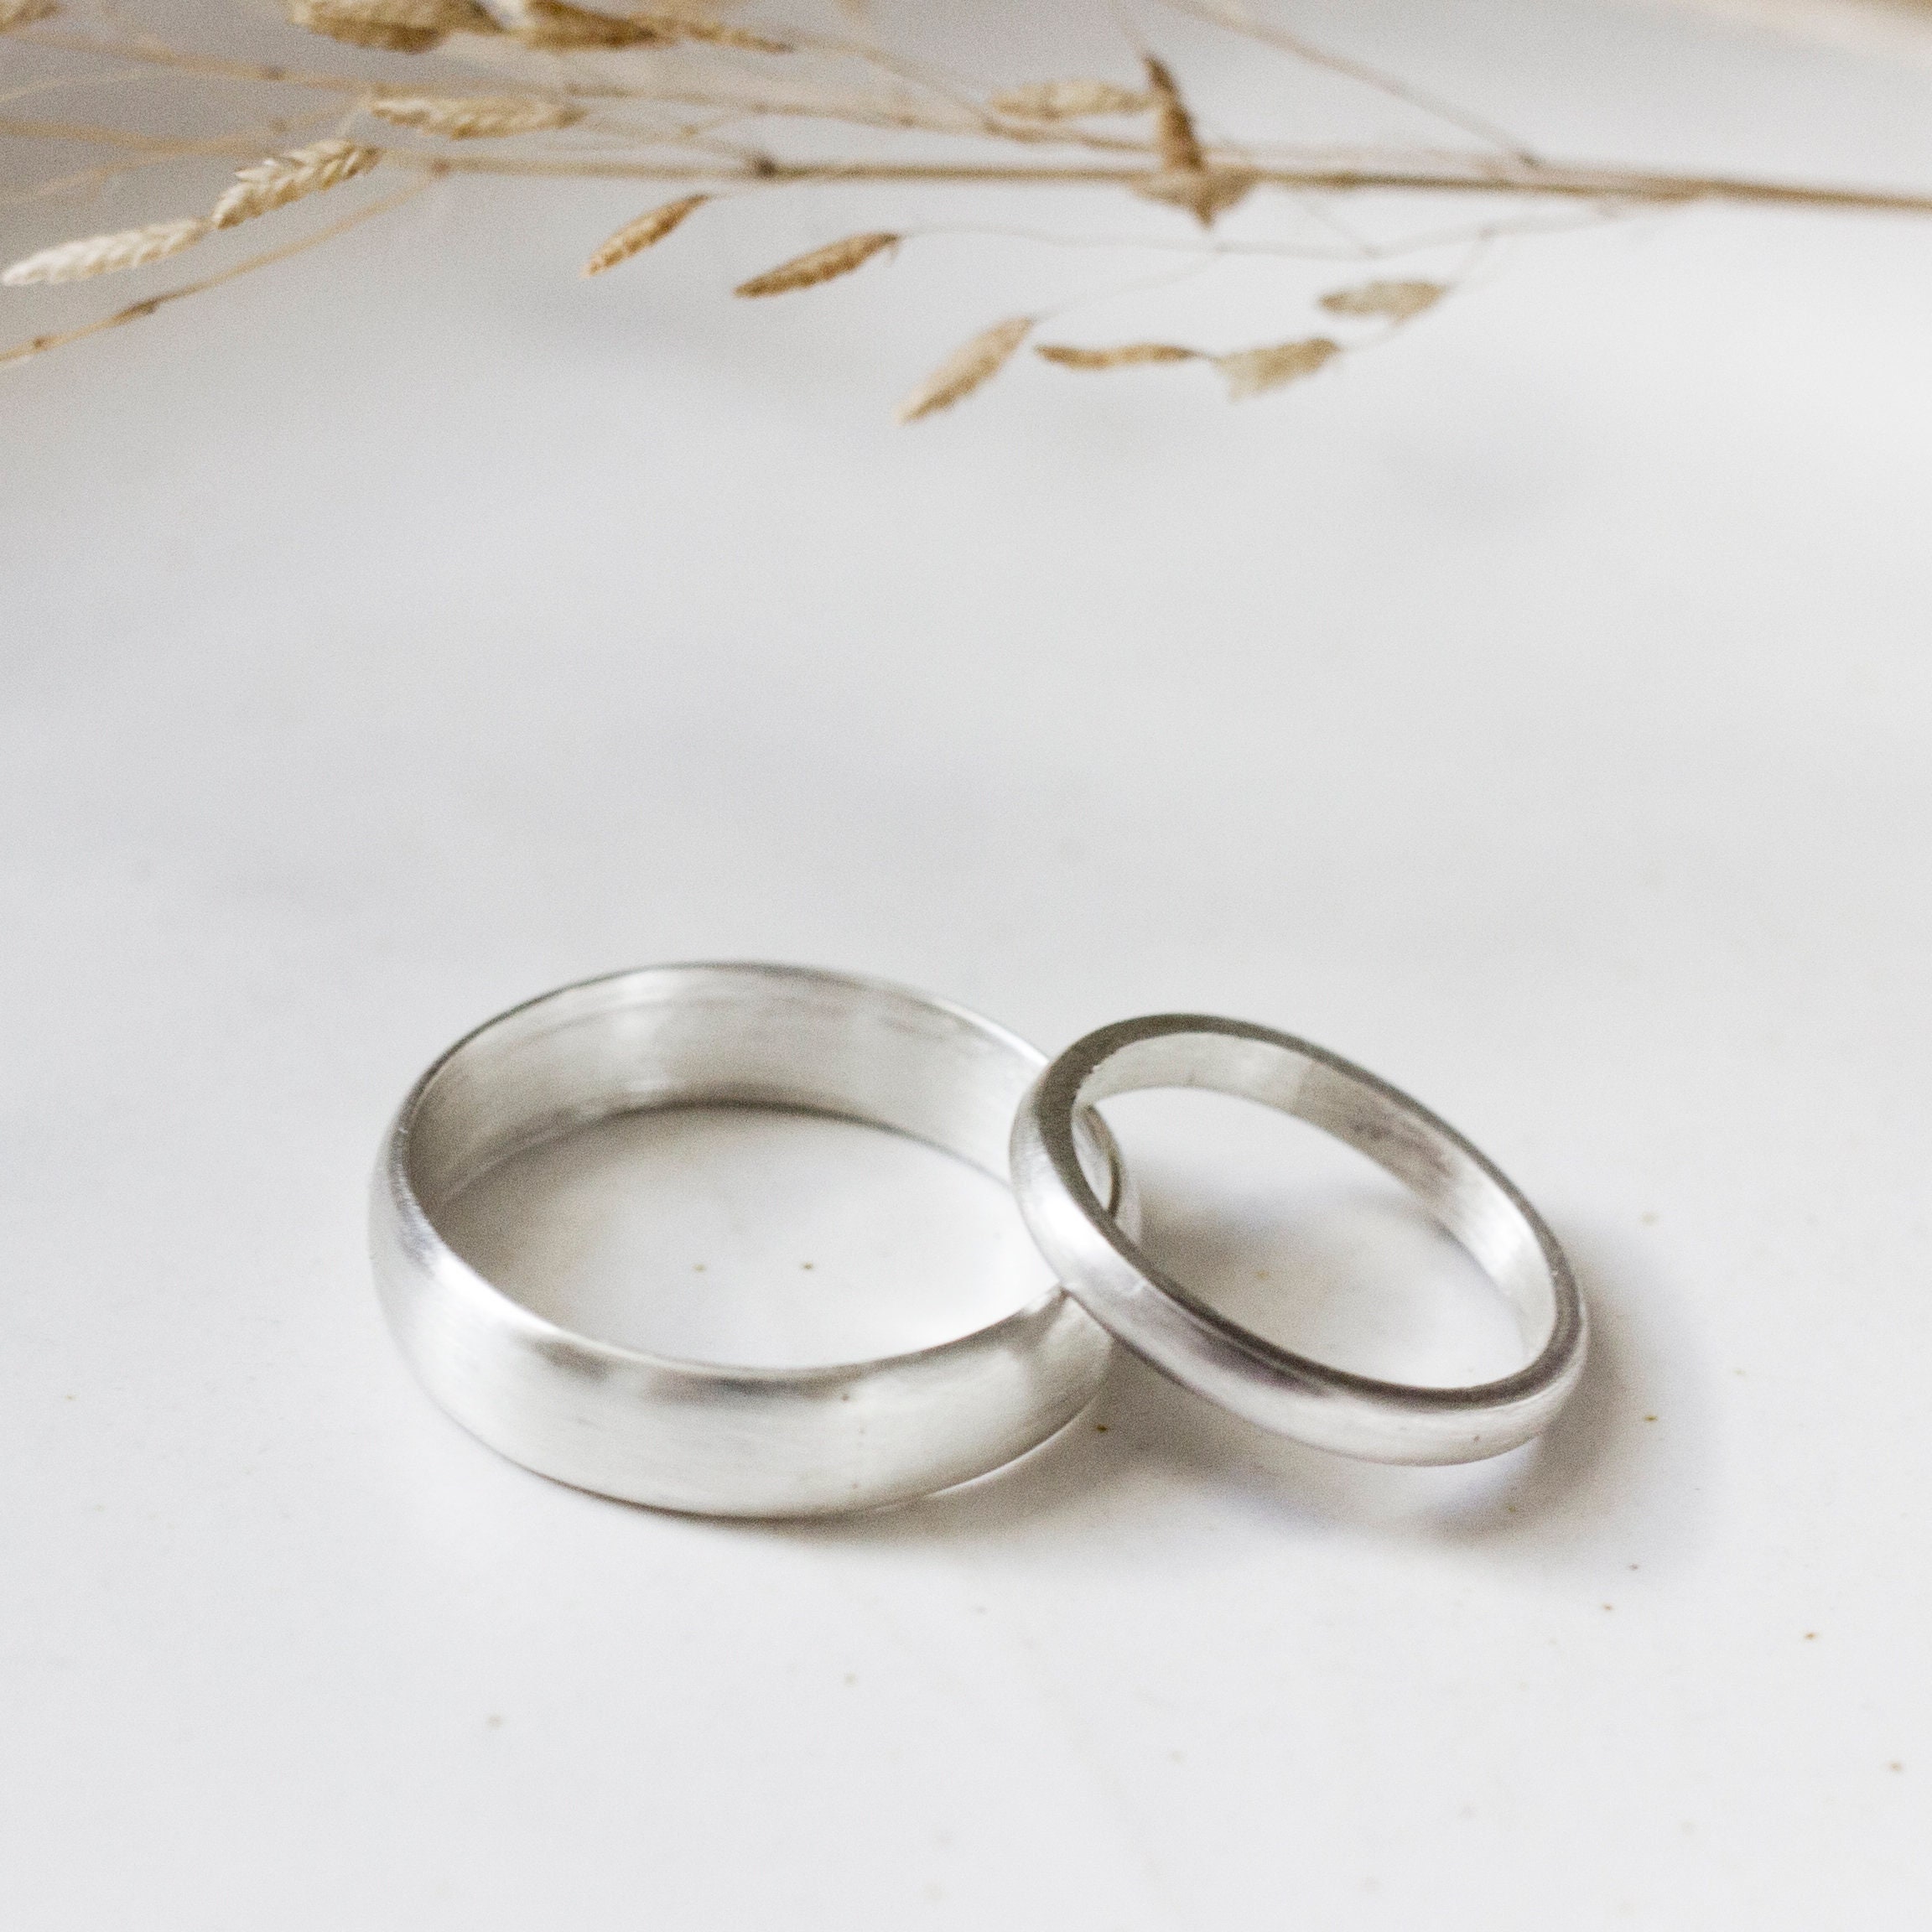 Silver Promise Ring Set | Matte 100% Recycled Sterling Bands - Men’s, Women’s, Unisex Wedding Rings